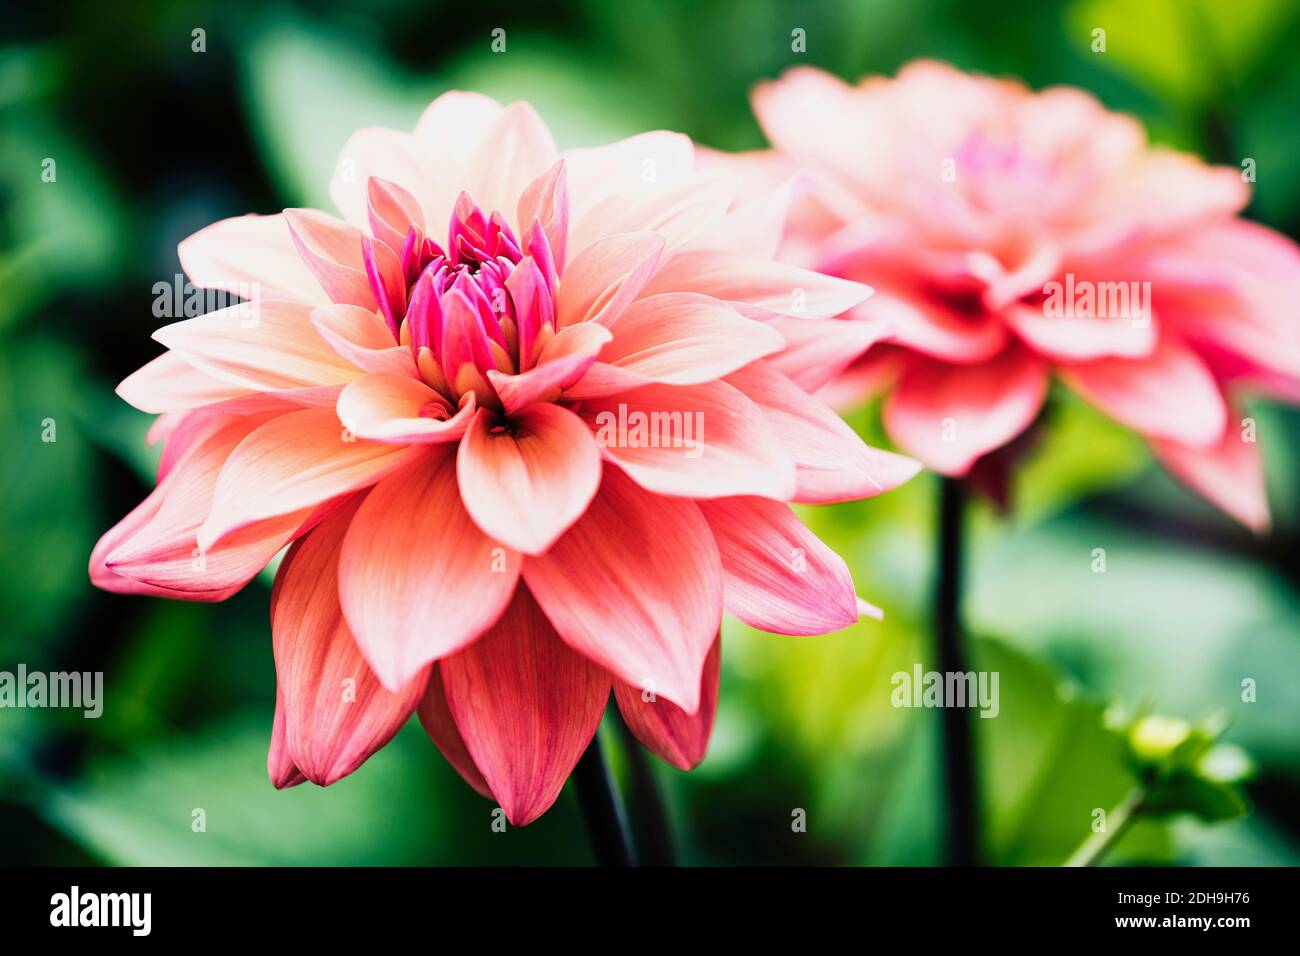 Dahlia, Pink coloured shaggy flower growing outdoor. Stock Photo